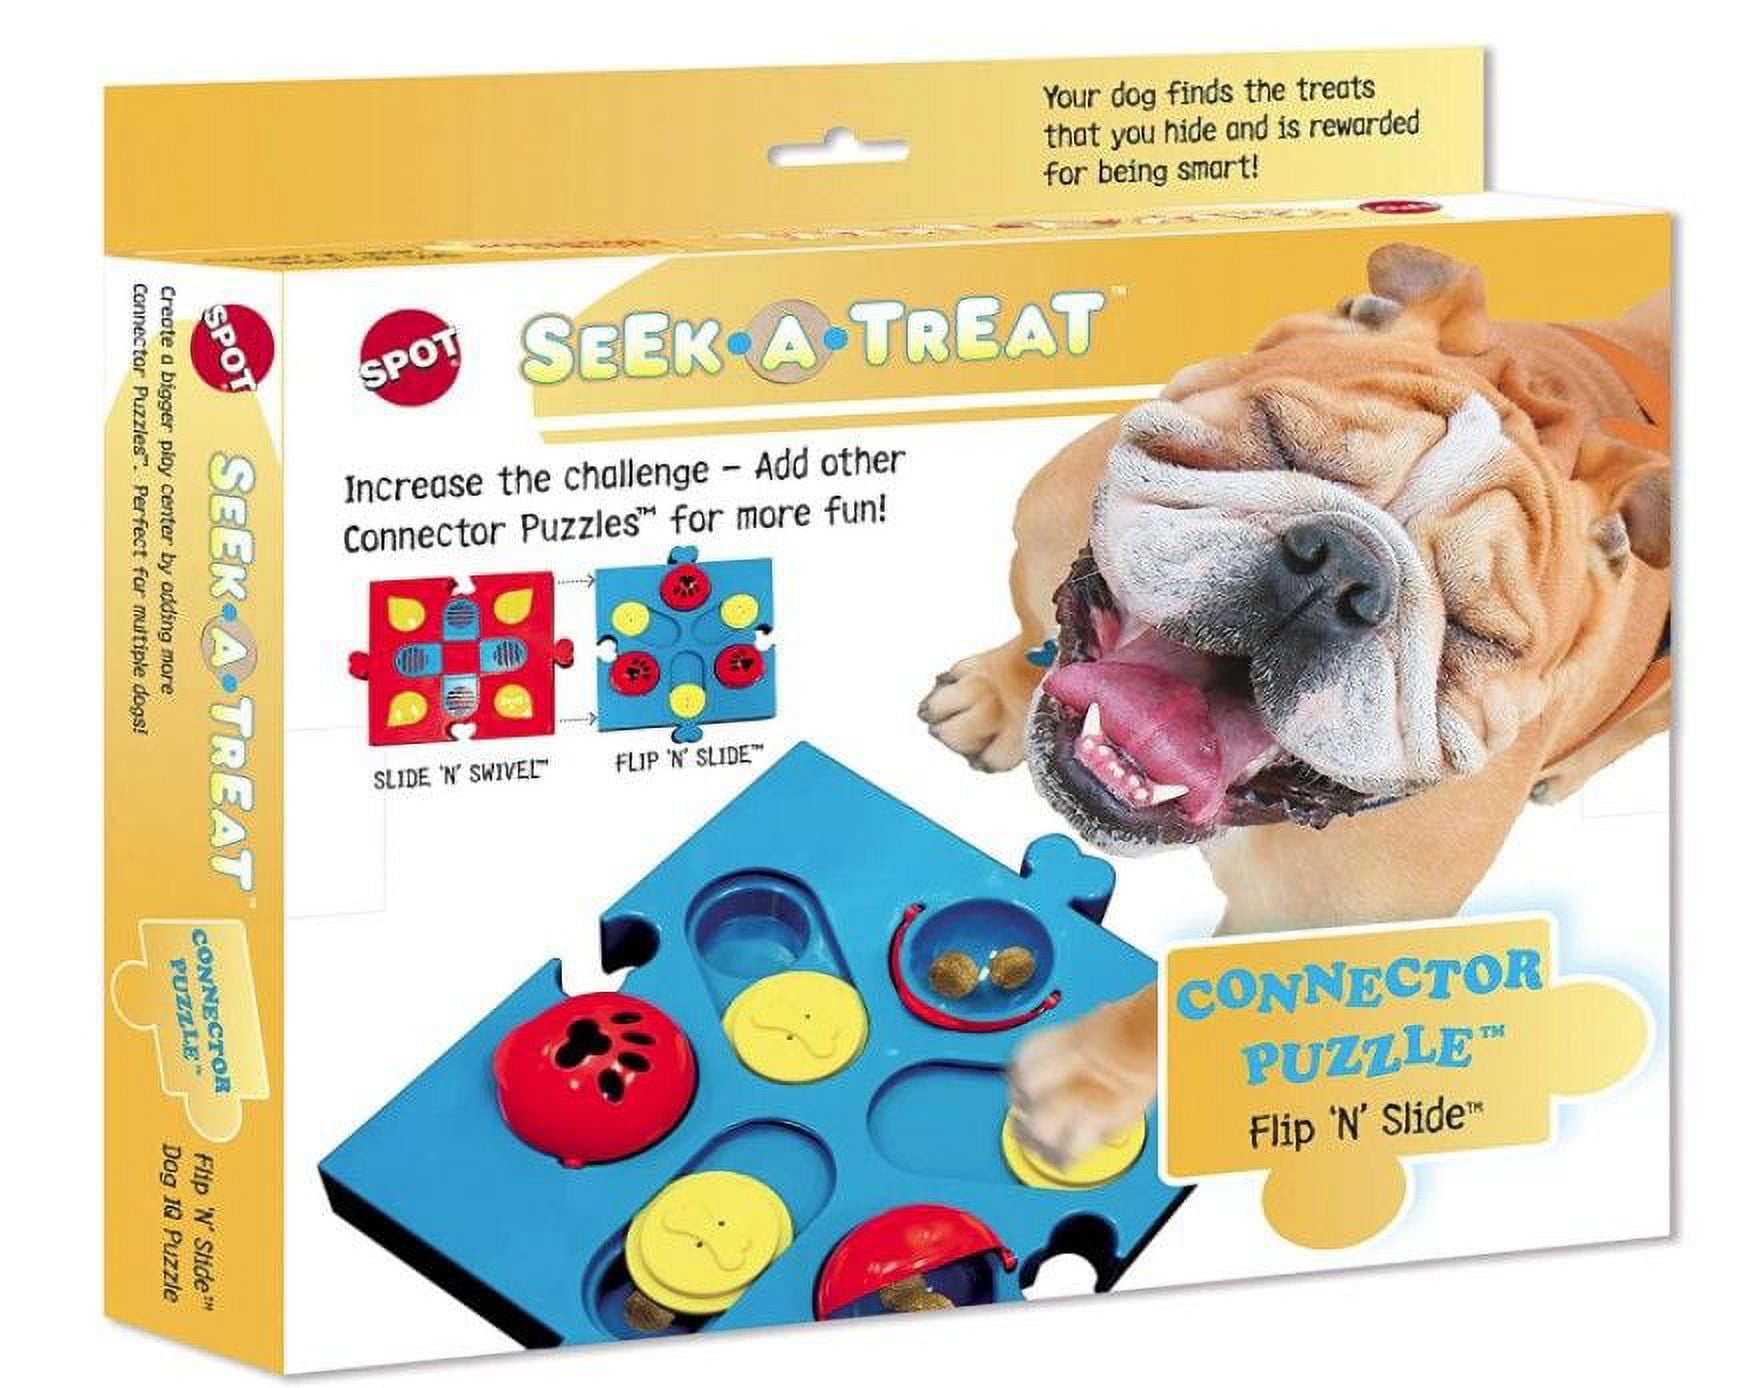 Spot Seek-A-Treat Flip 'N Slide Connector Puzzle Interactive Dog Treat and  Toy Puzzle 1 count Pack of 3 